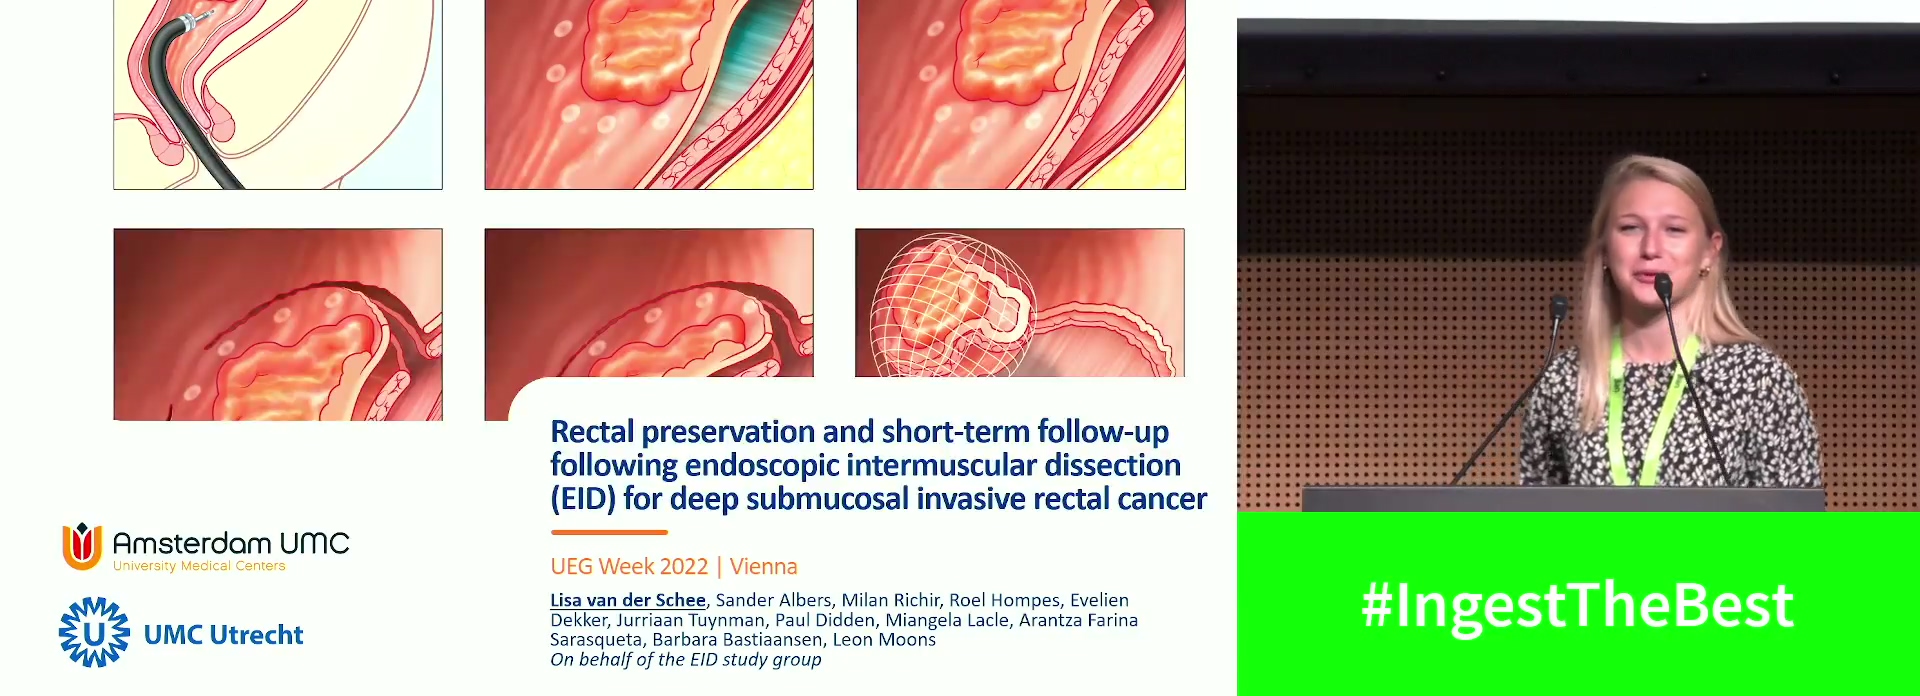 RECTAL PRESERVATION FOLLOWING ENDOSCOPIC INTERMUSCULAR DISSECTION (EID) FOR DEEP SUBMUCOSAL INVASIVE RECTAL CANCER: SHORT TO INTERMEDIATE-TERM FOLLOW-UP